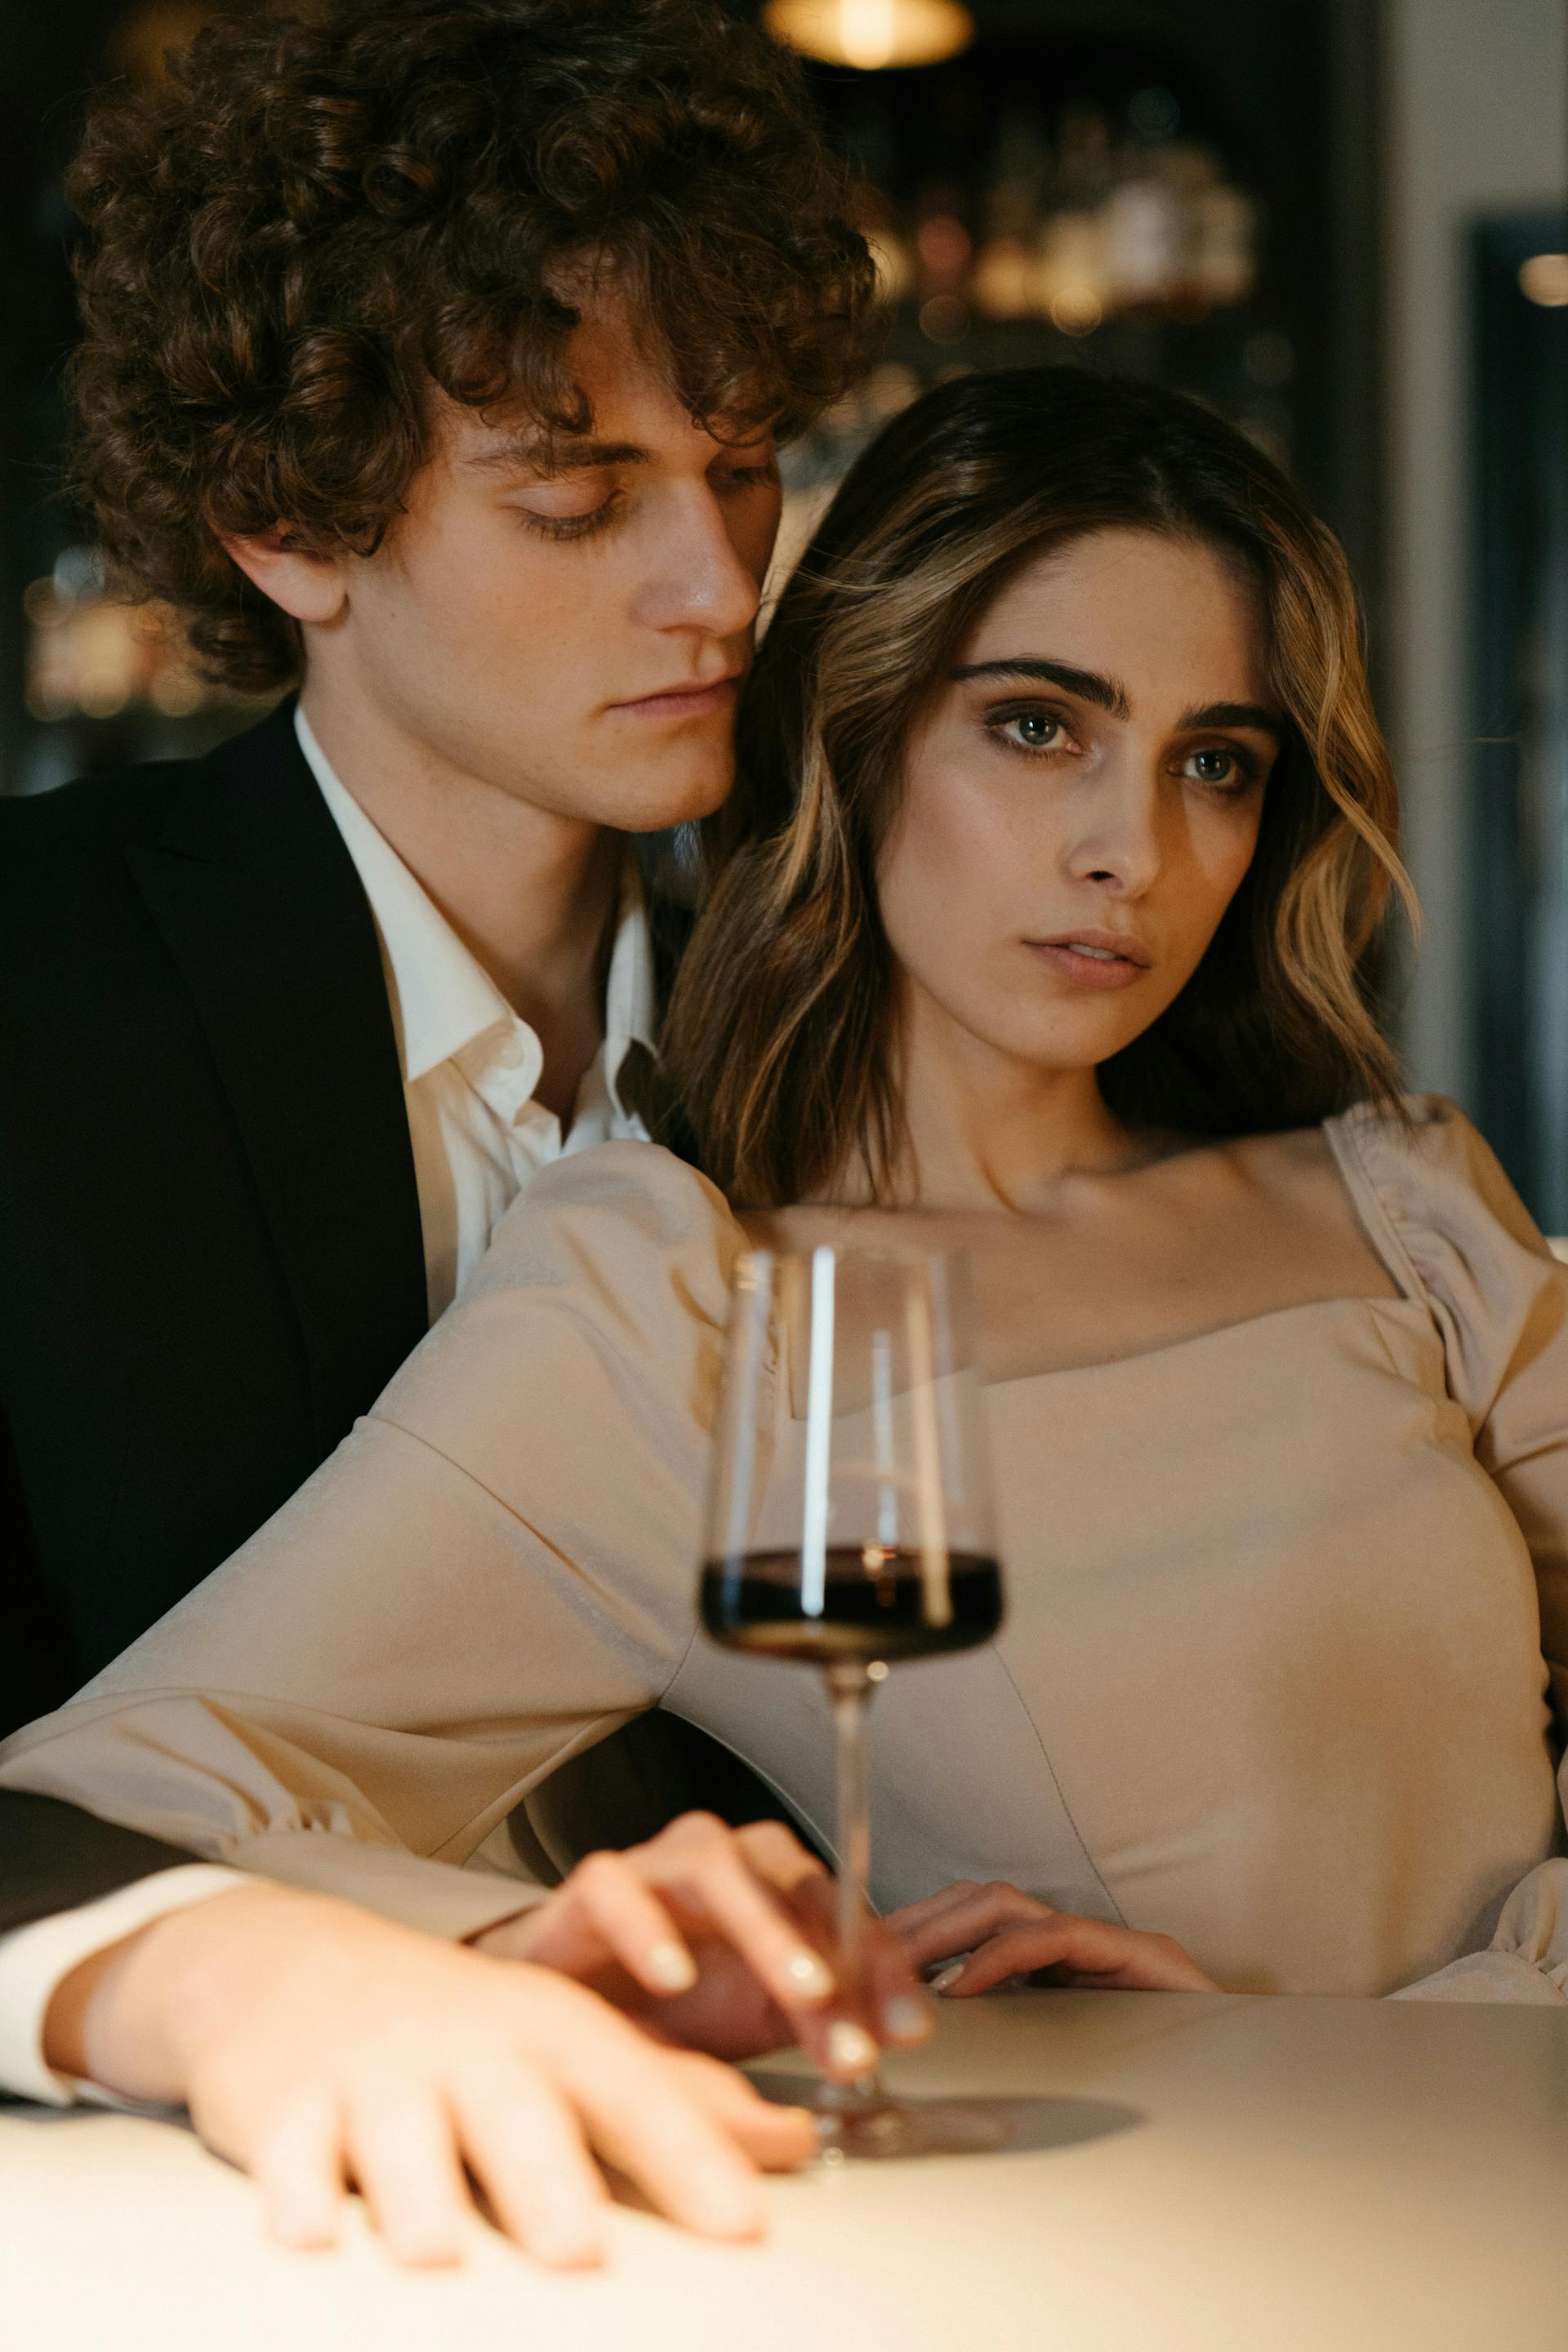 A couple in a bar | Source: Pexels